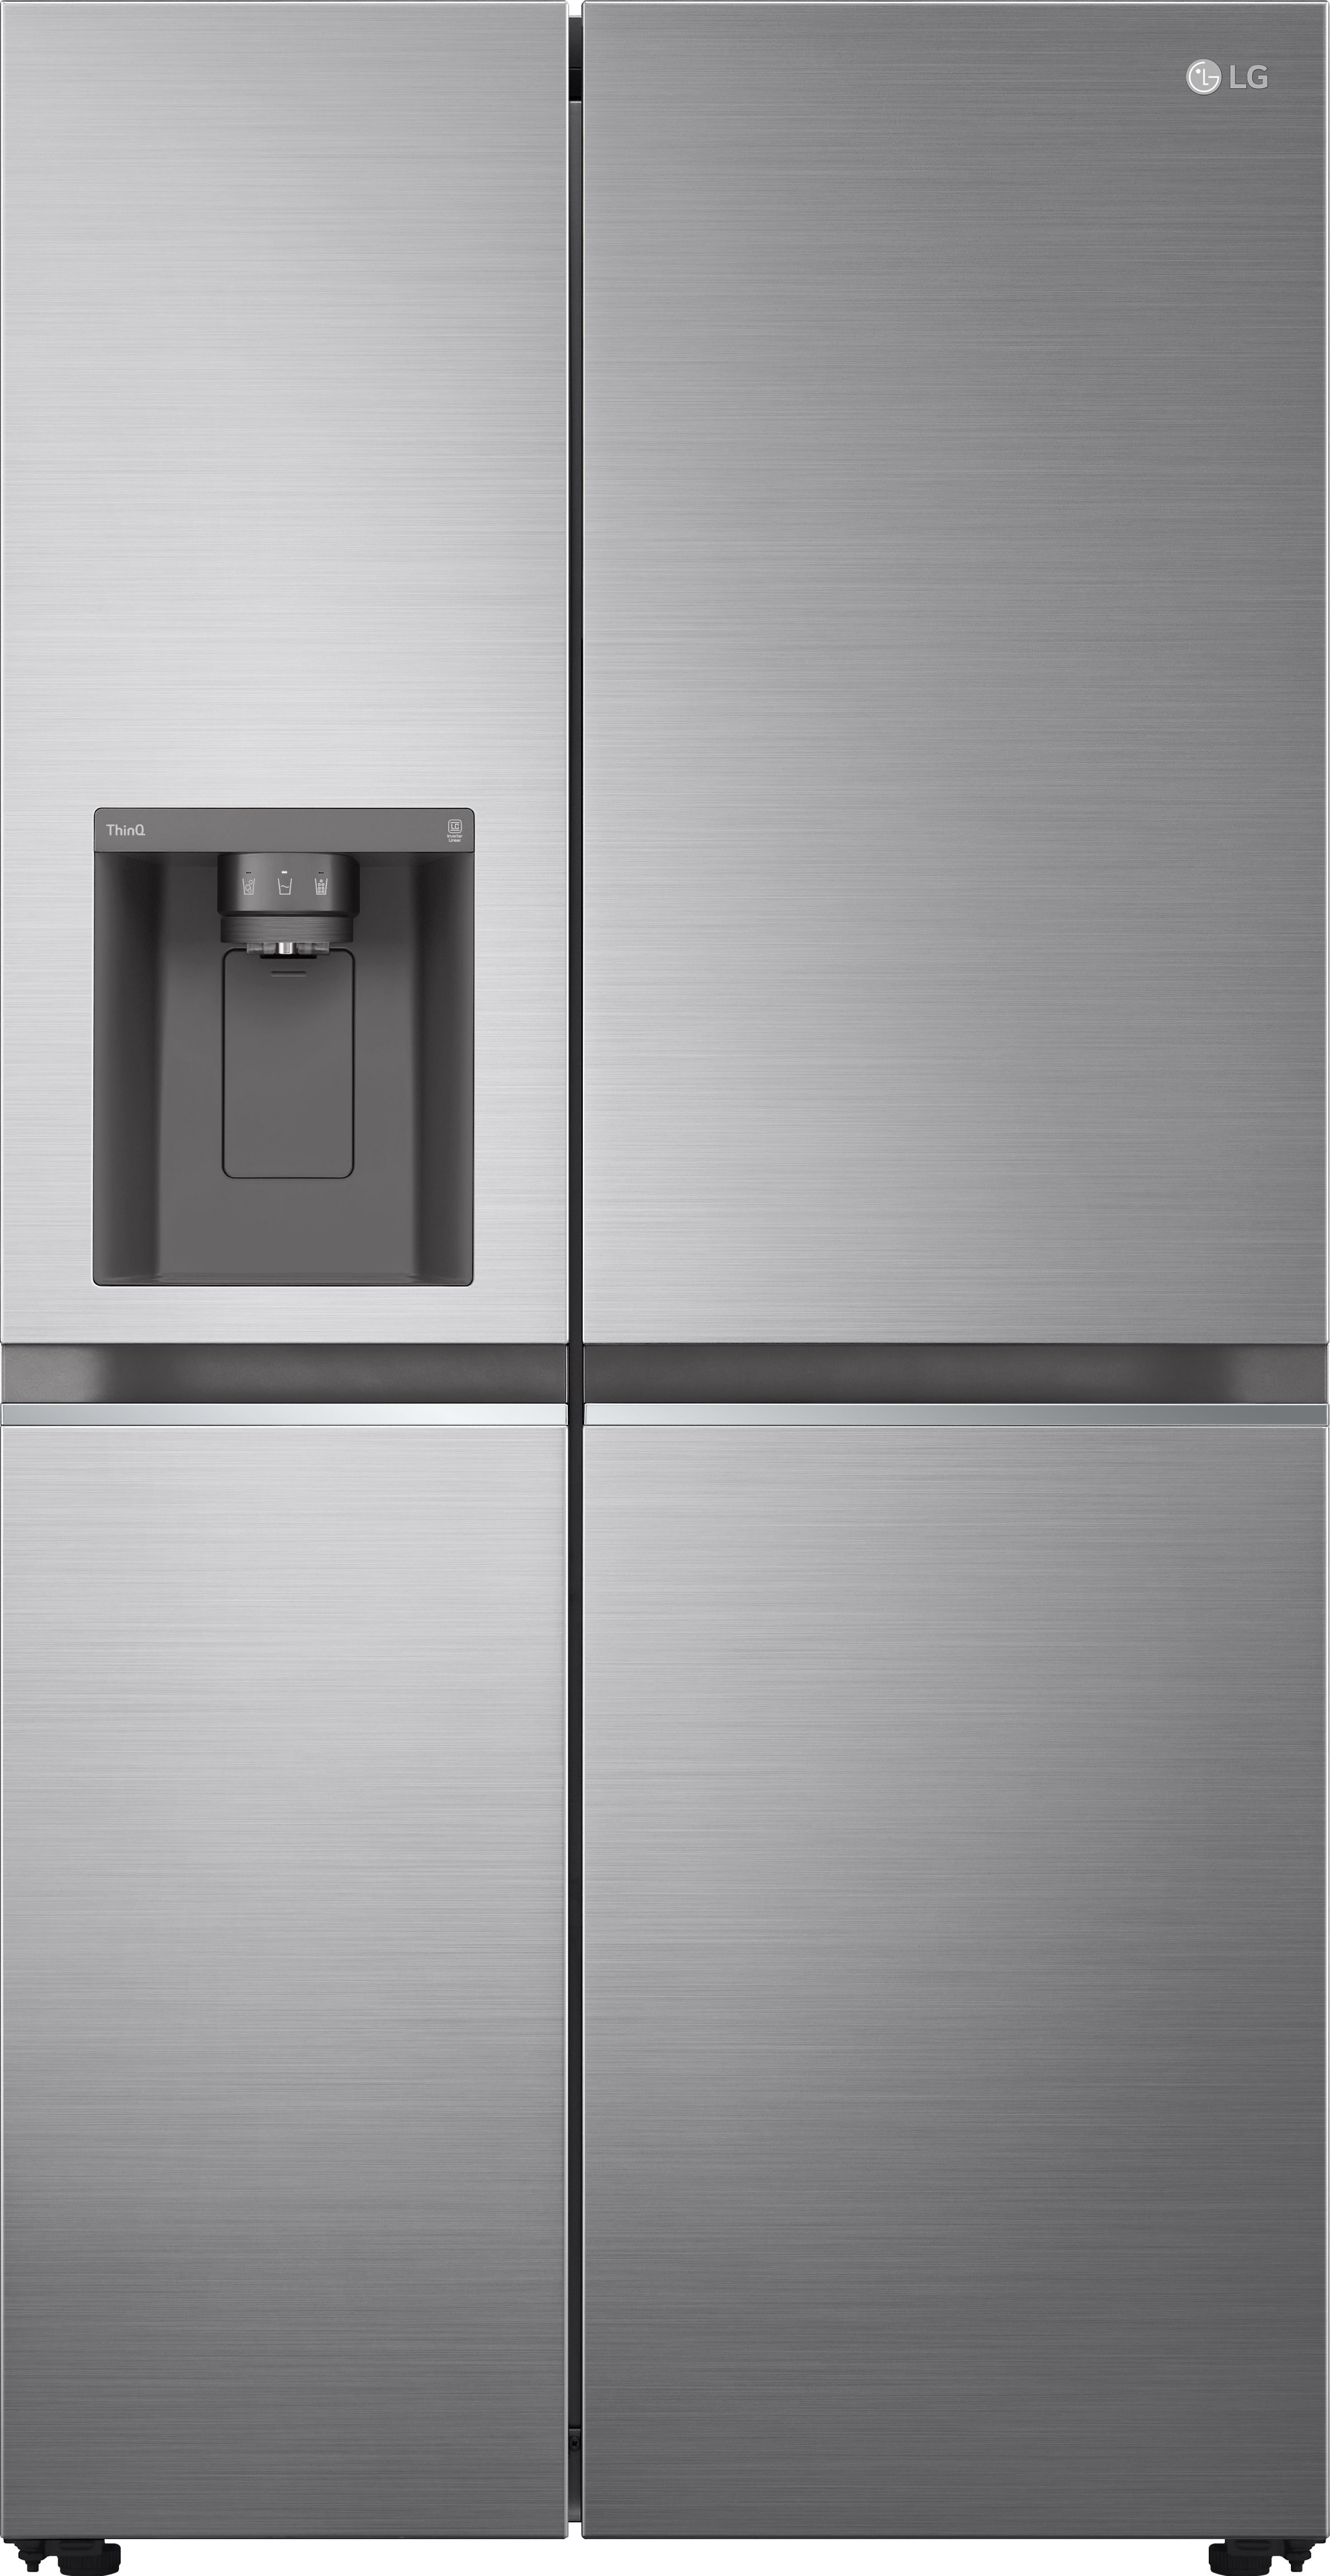 LG NatureFRESH GSLA80PZLD Wifi Connected Plumbed Frost Free American Fridge Freezer - Shiny Steel - D Rated, Silver